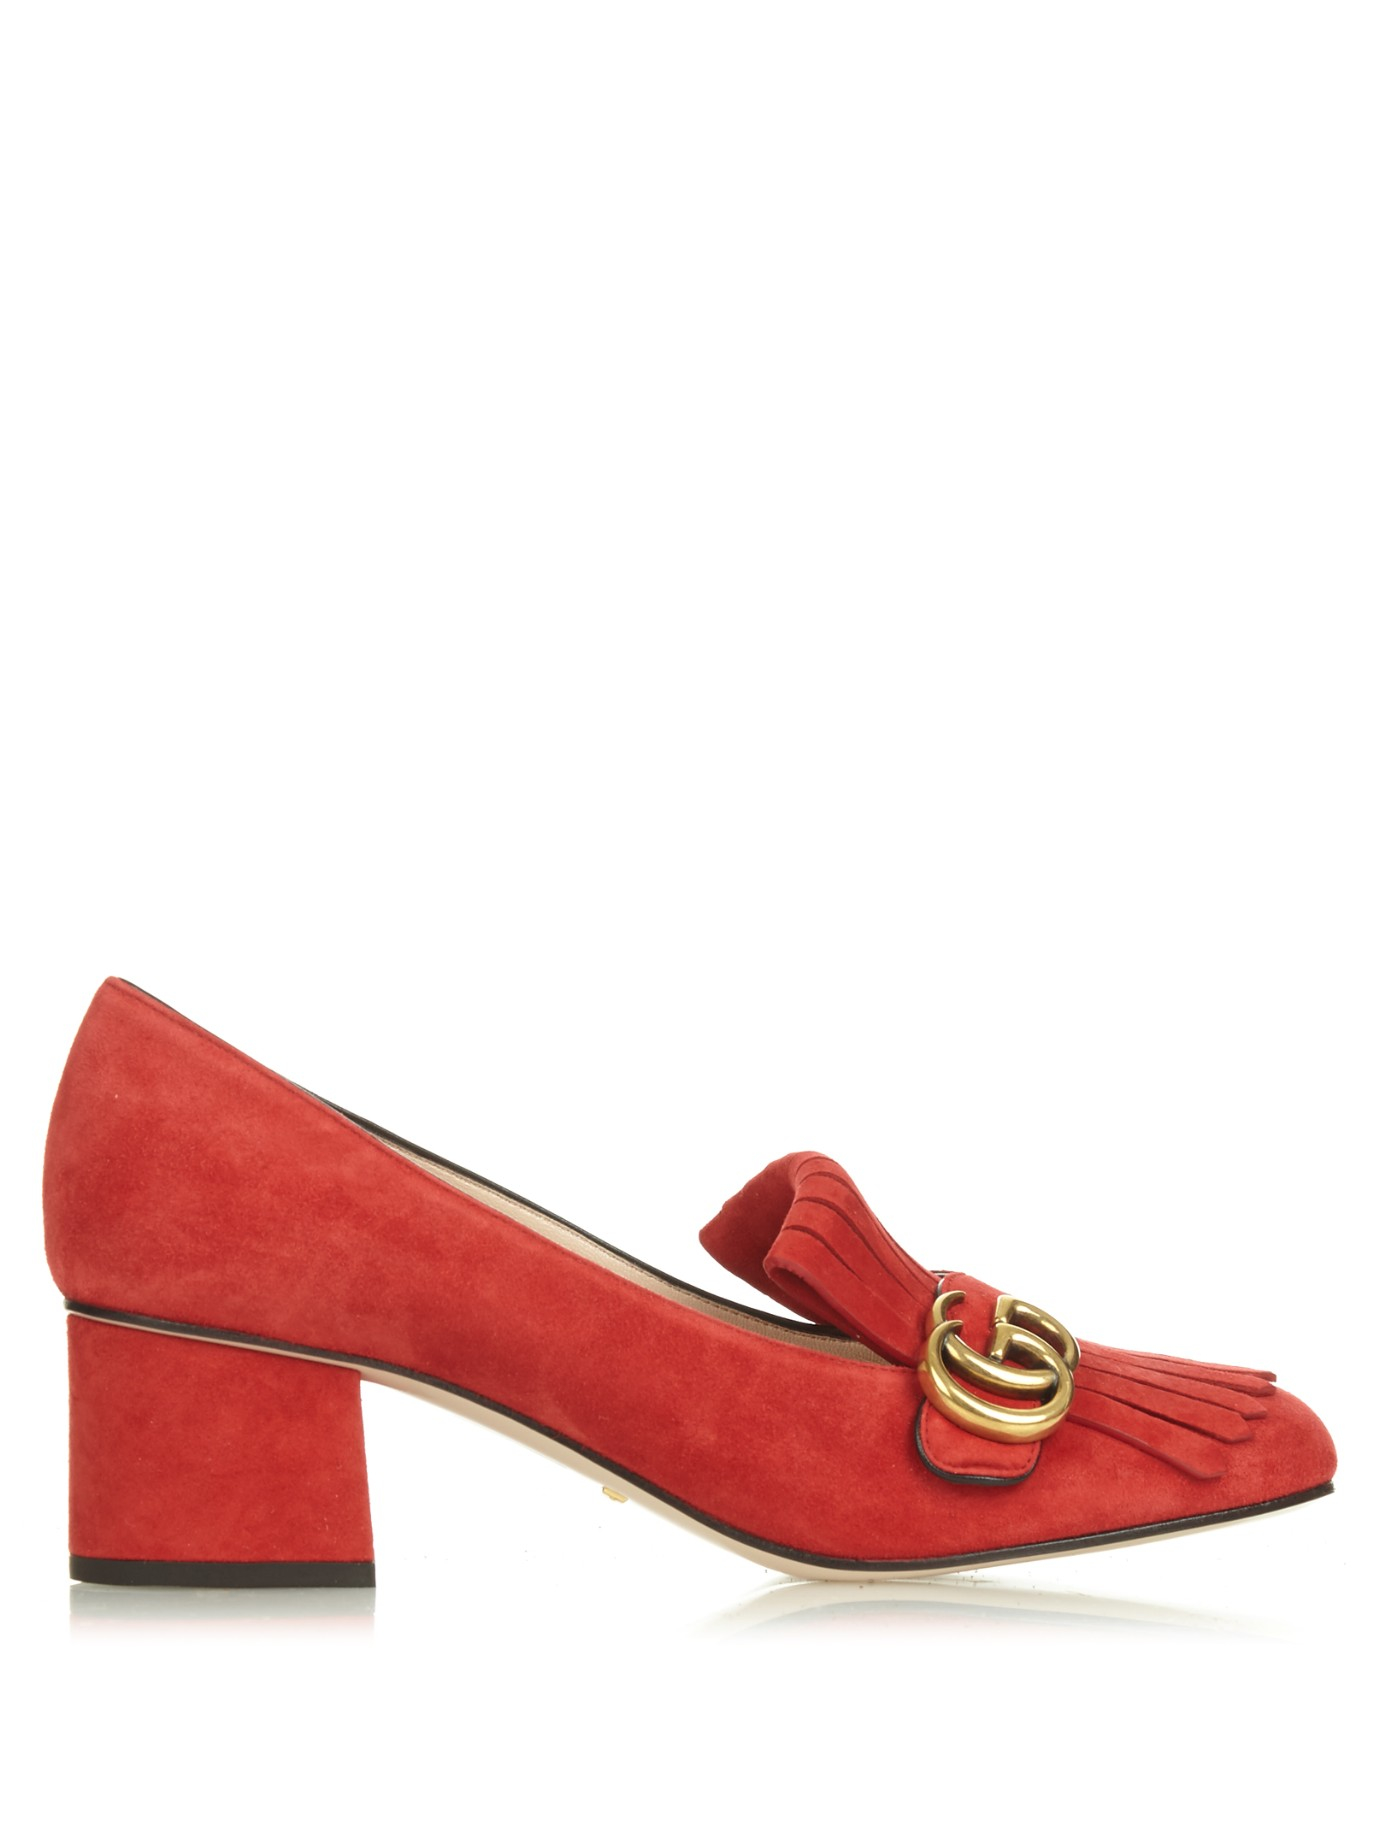 Gucci Marmont Fringed Suede Pumps in 